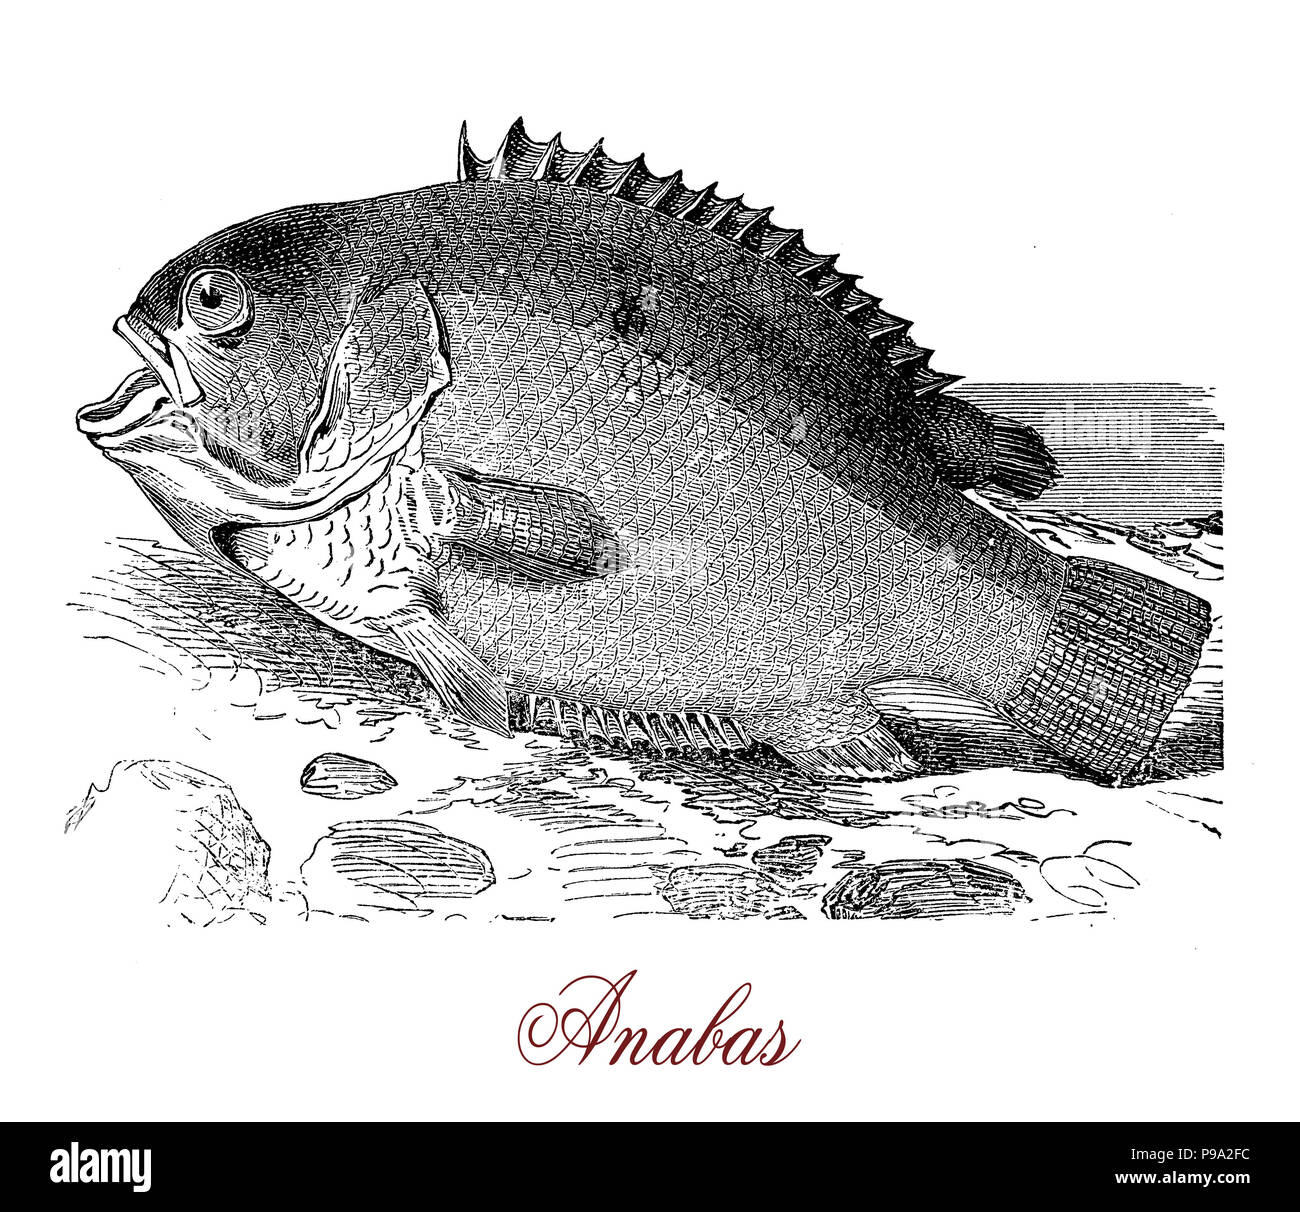 Vintage engraving of anabas, fish native to south and East Asia, carnivorous, can live out of water breathing air oxygen for extended periods of time. Stock Photo